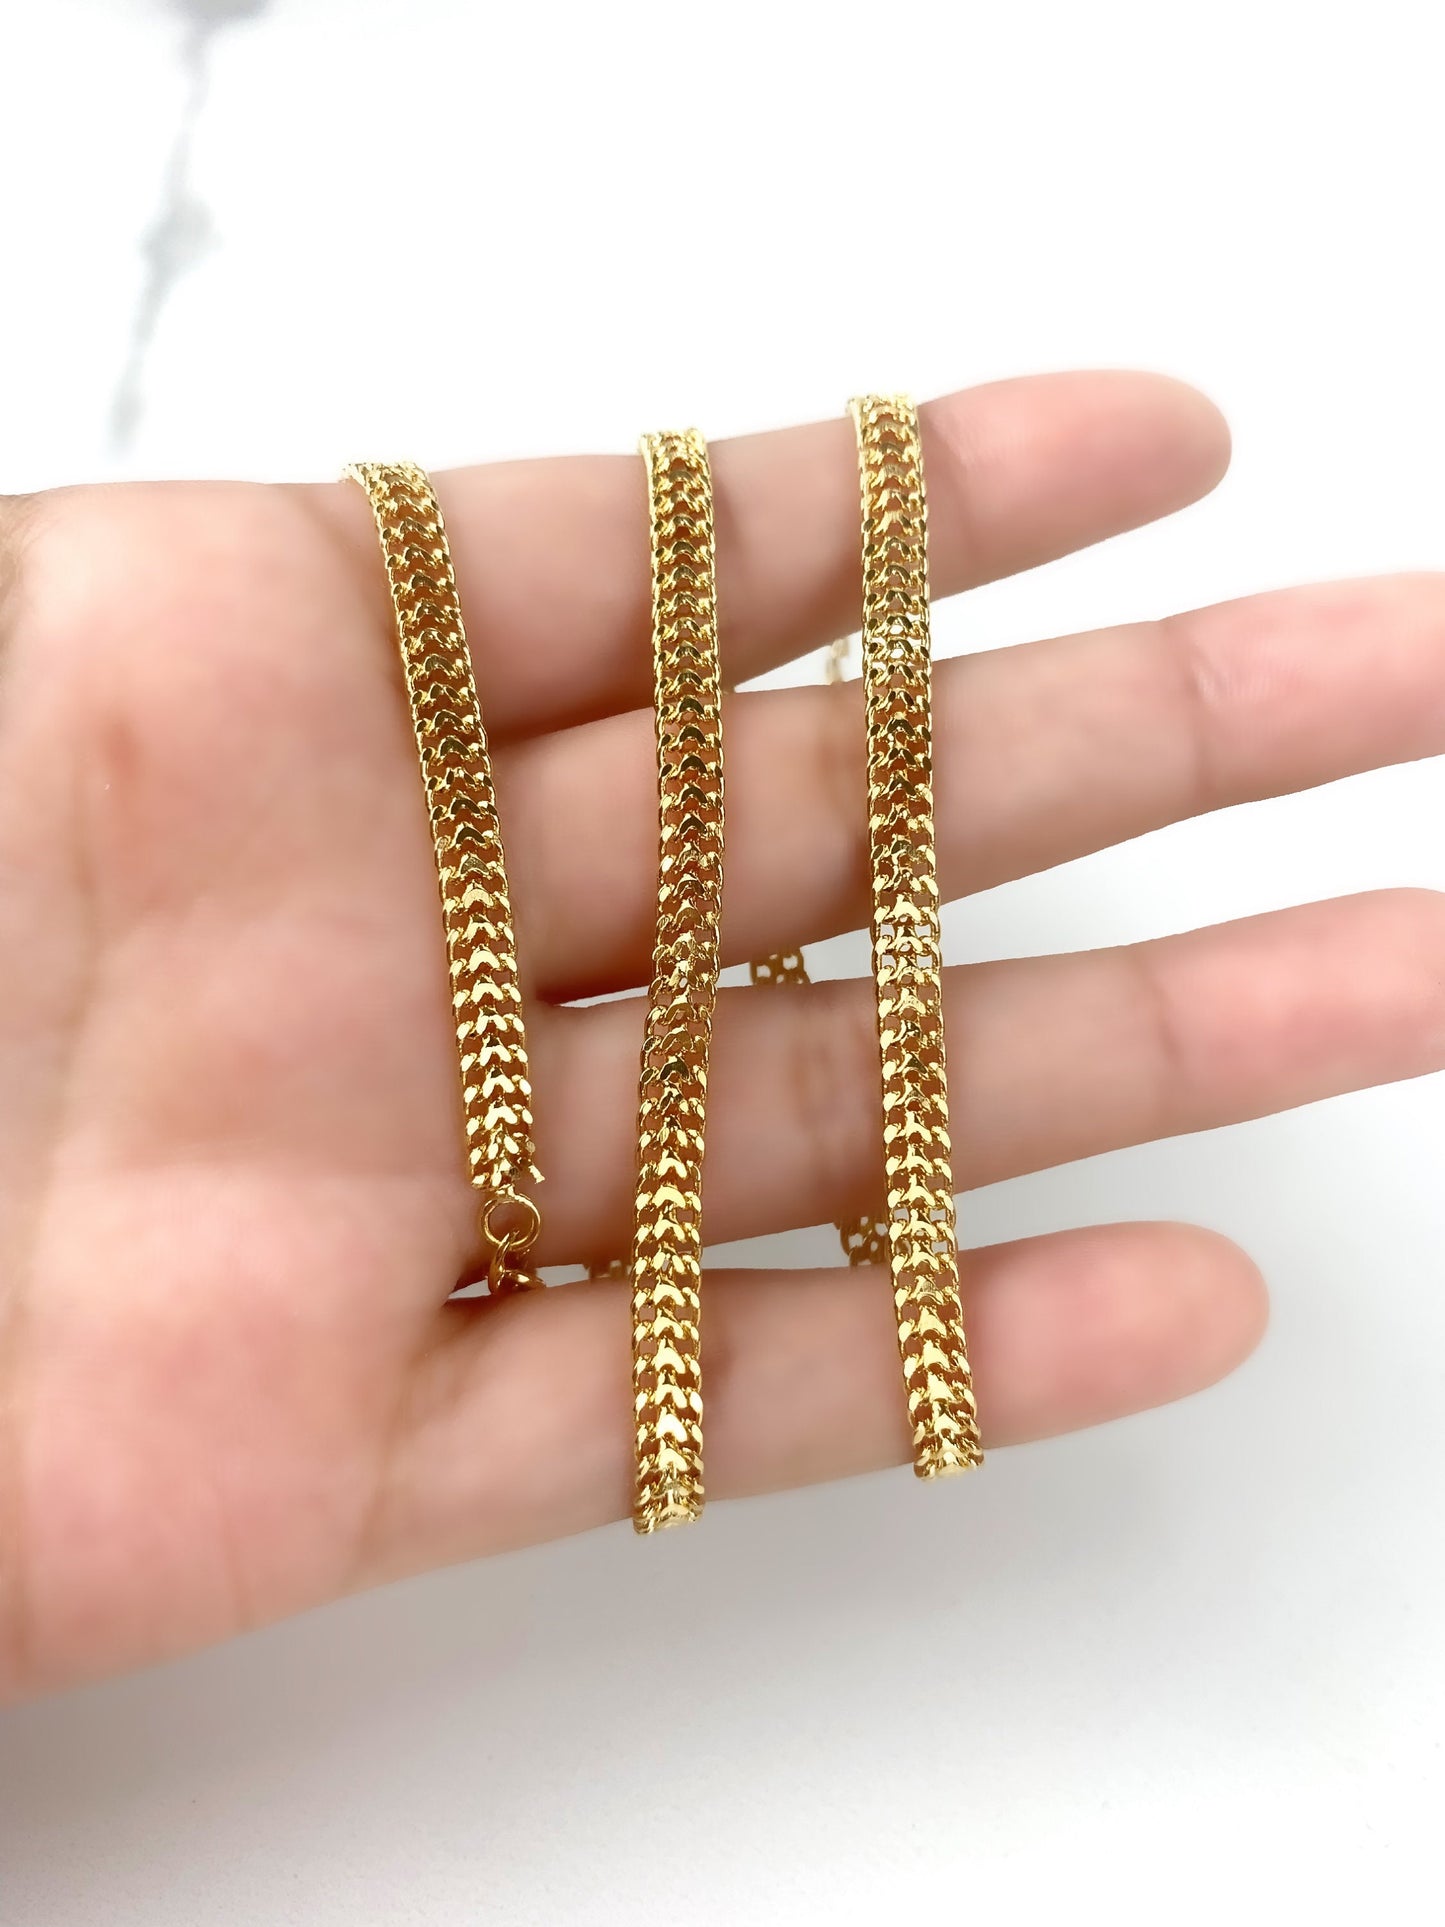 18k Gold Filled 4mm Flat Mat Chain, Double Curb Link Chain Choker or Bracelet, Wholesale Jewelry Making Supplies